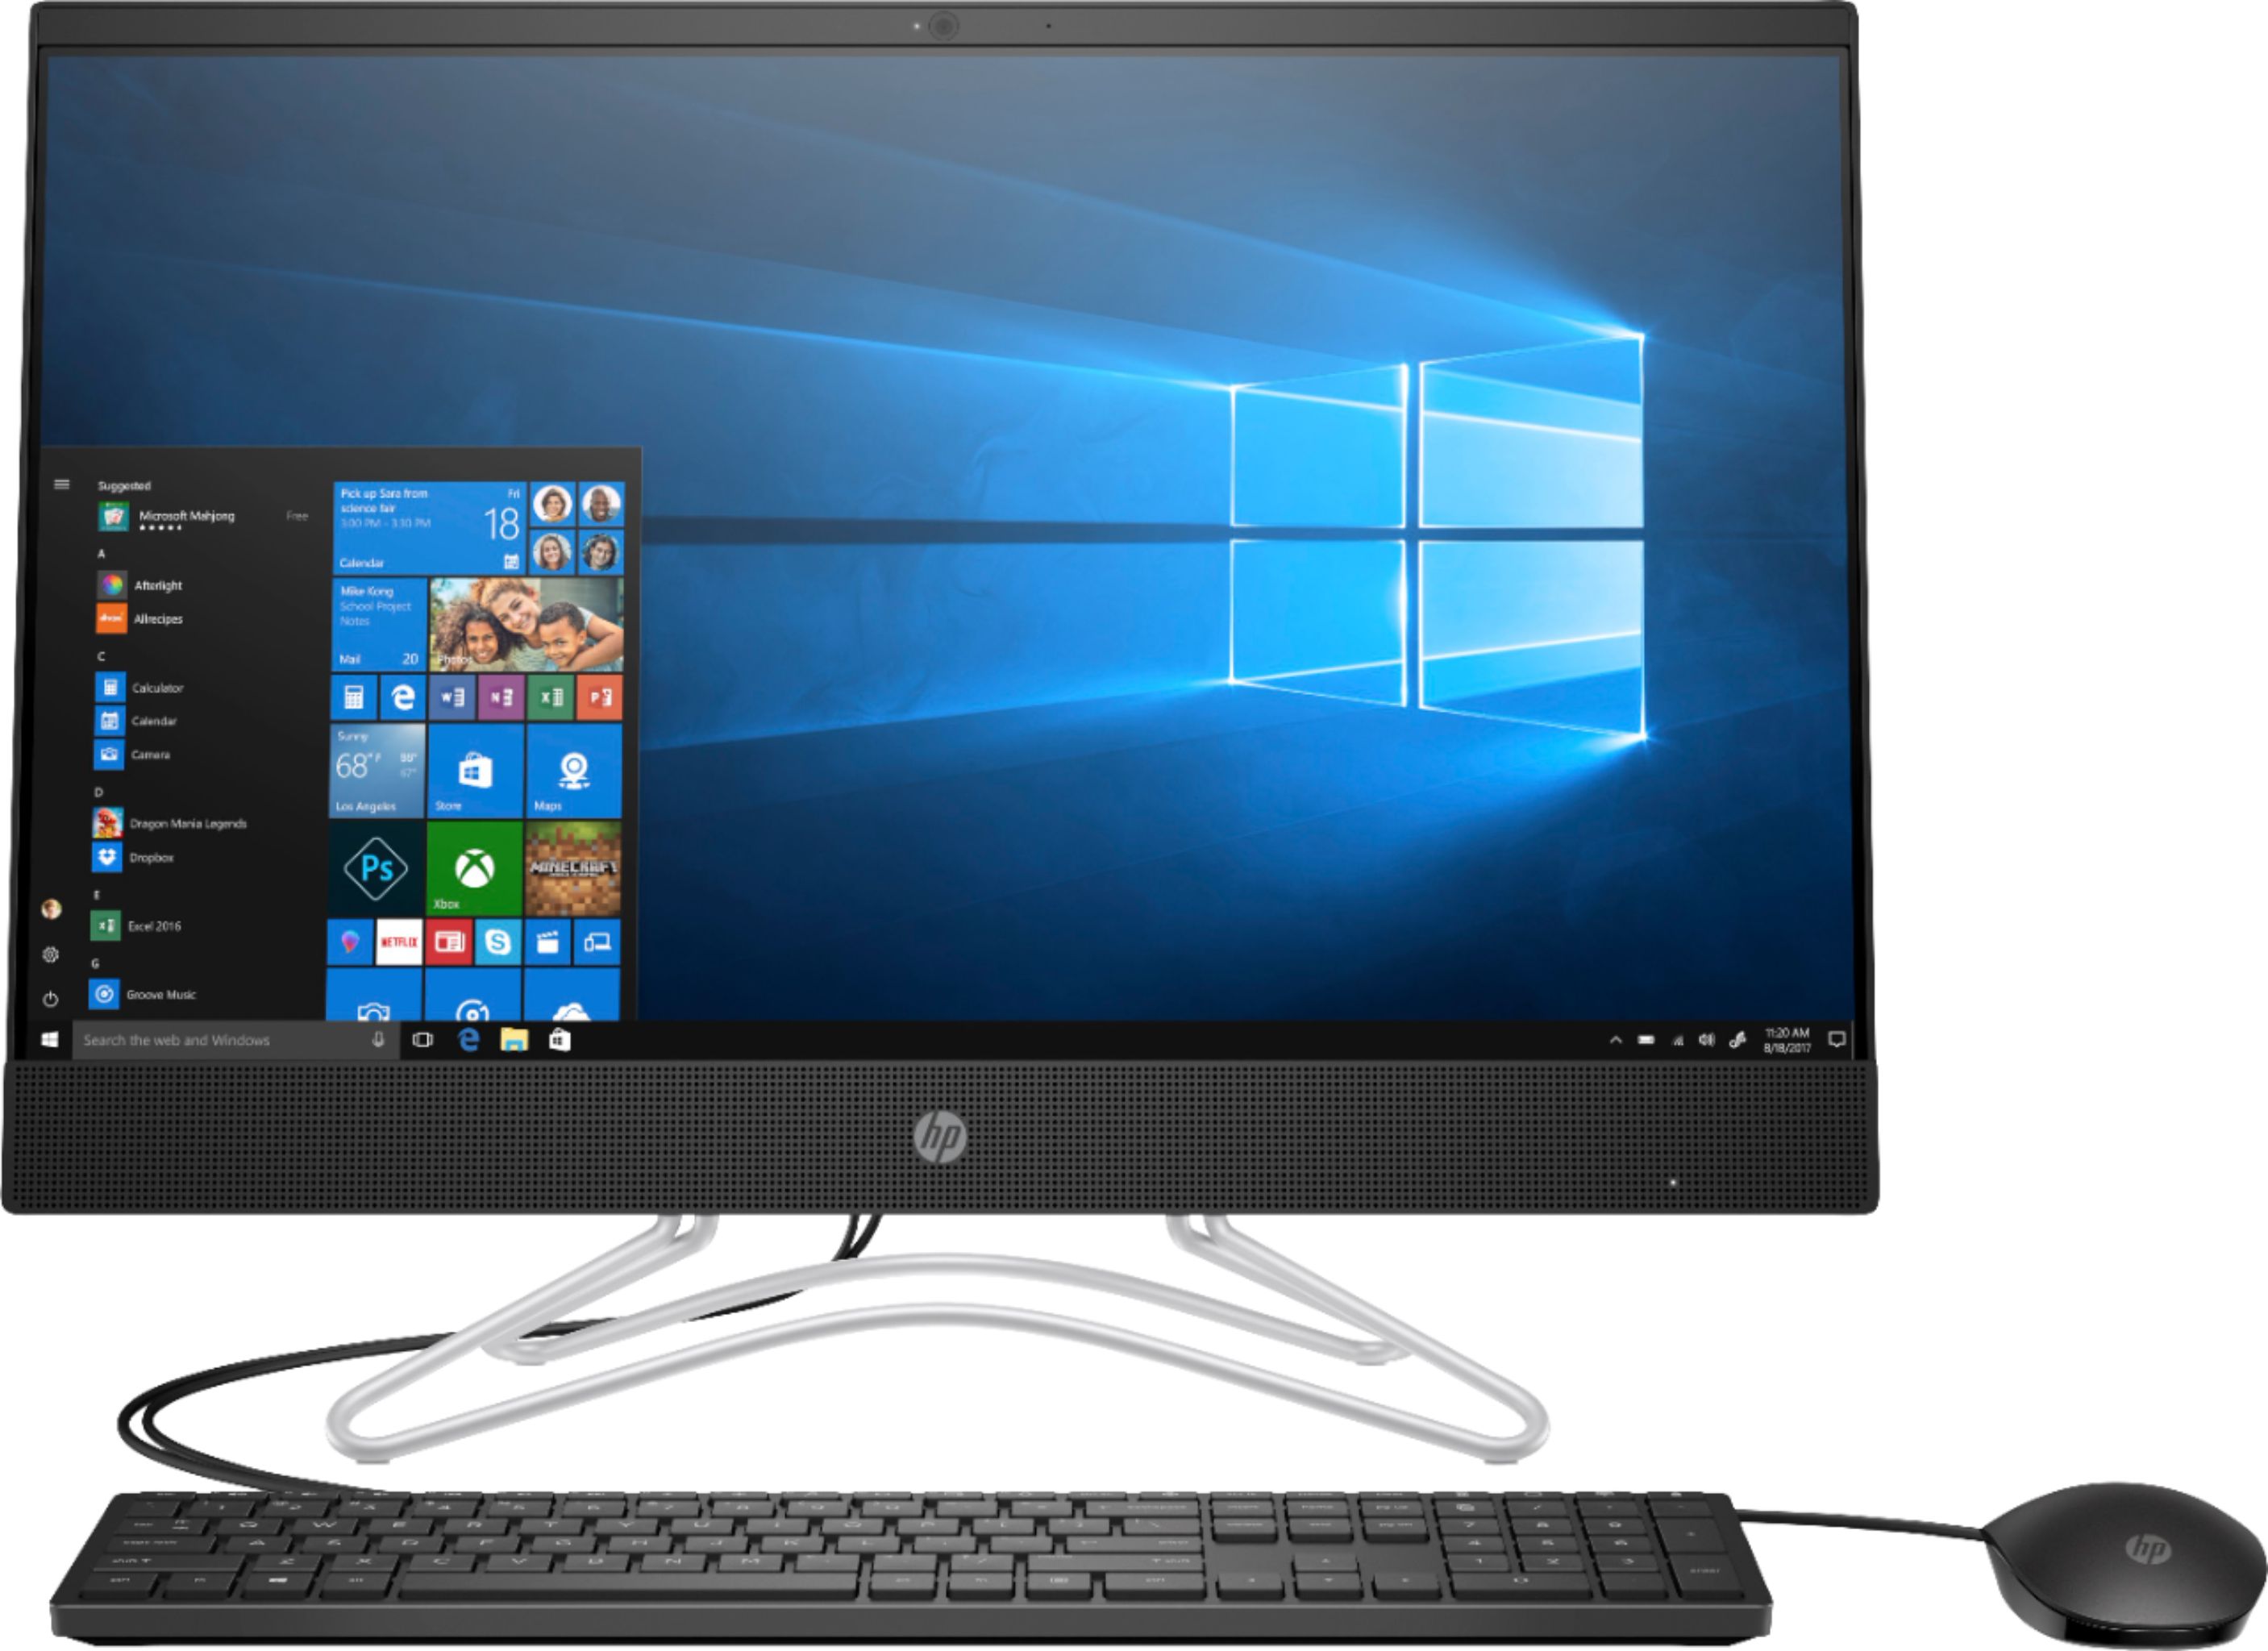 HP PC Desktops & All-In-One Computers for Sale 